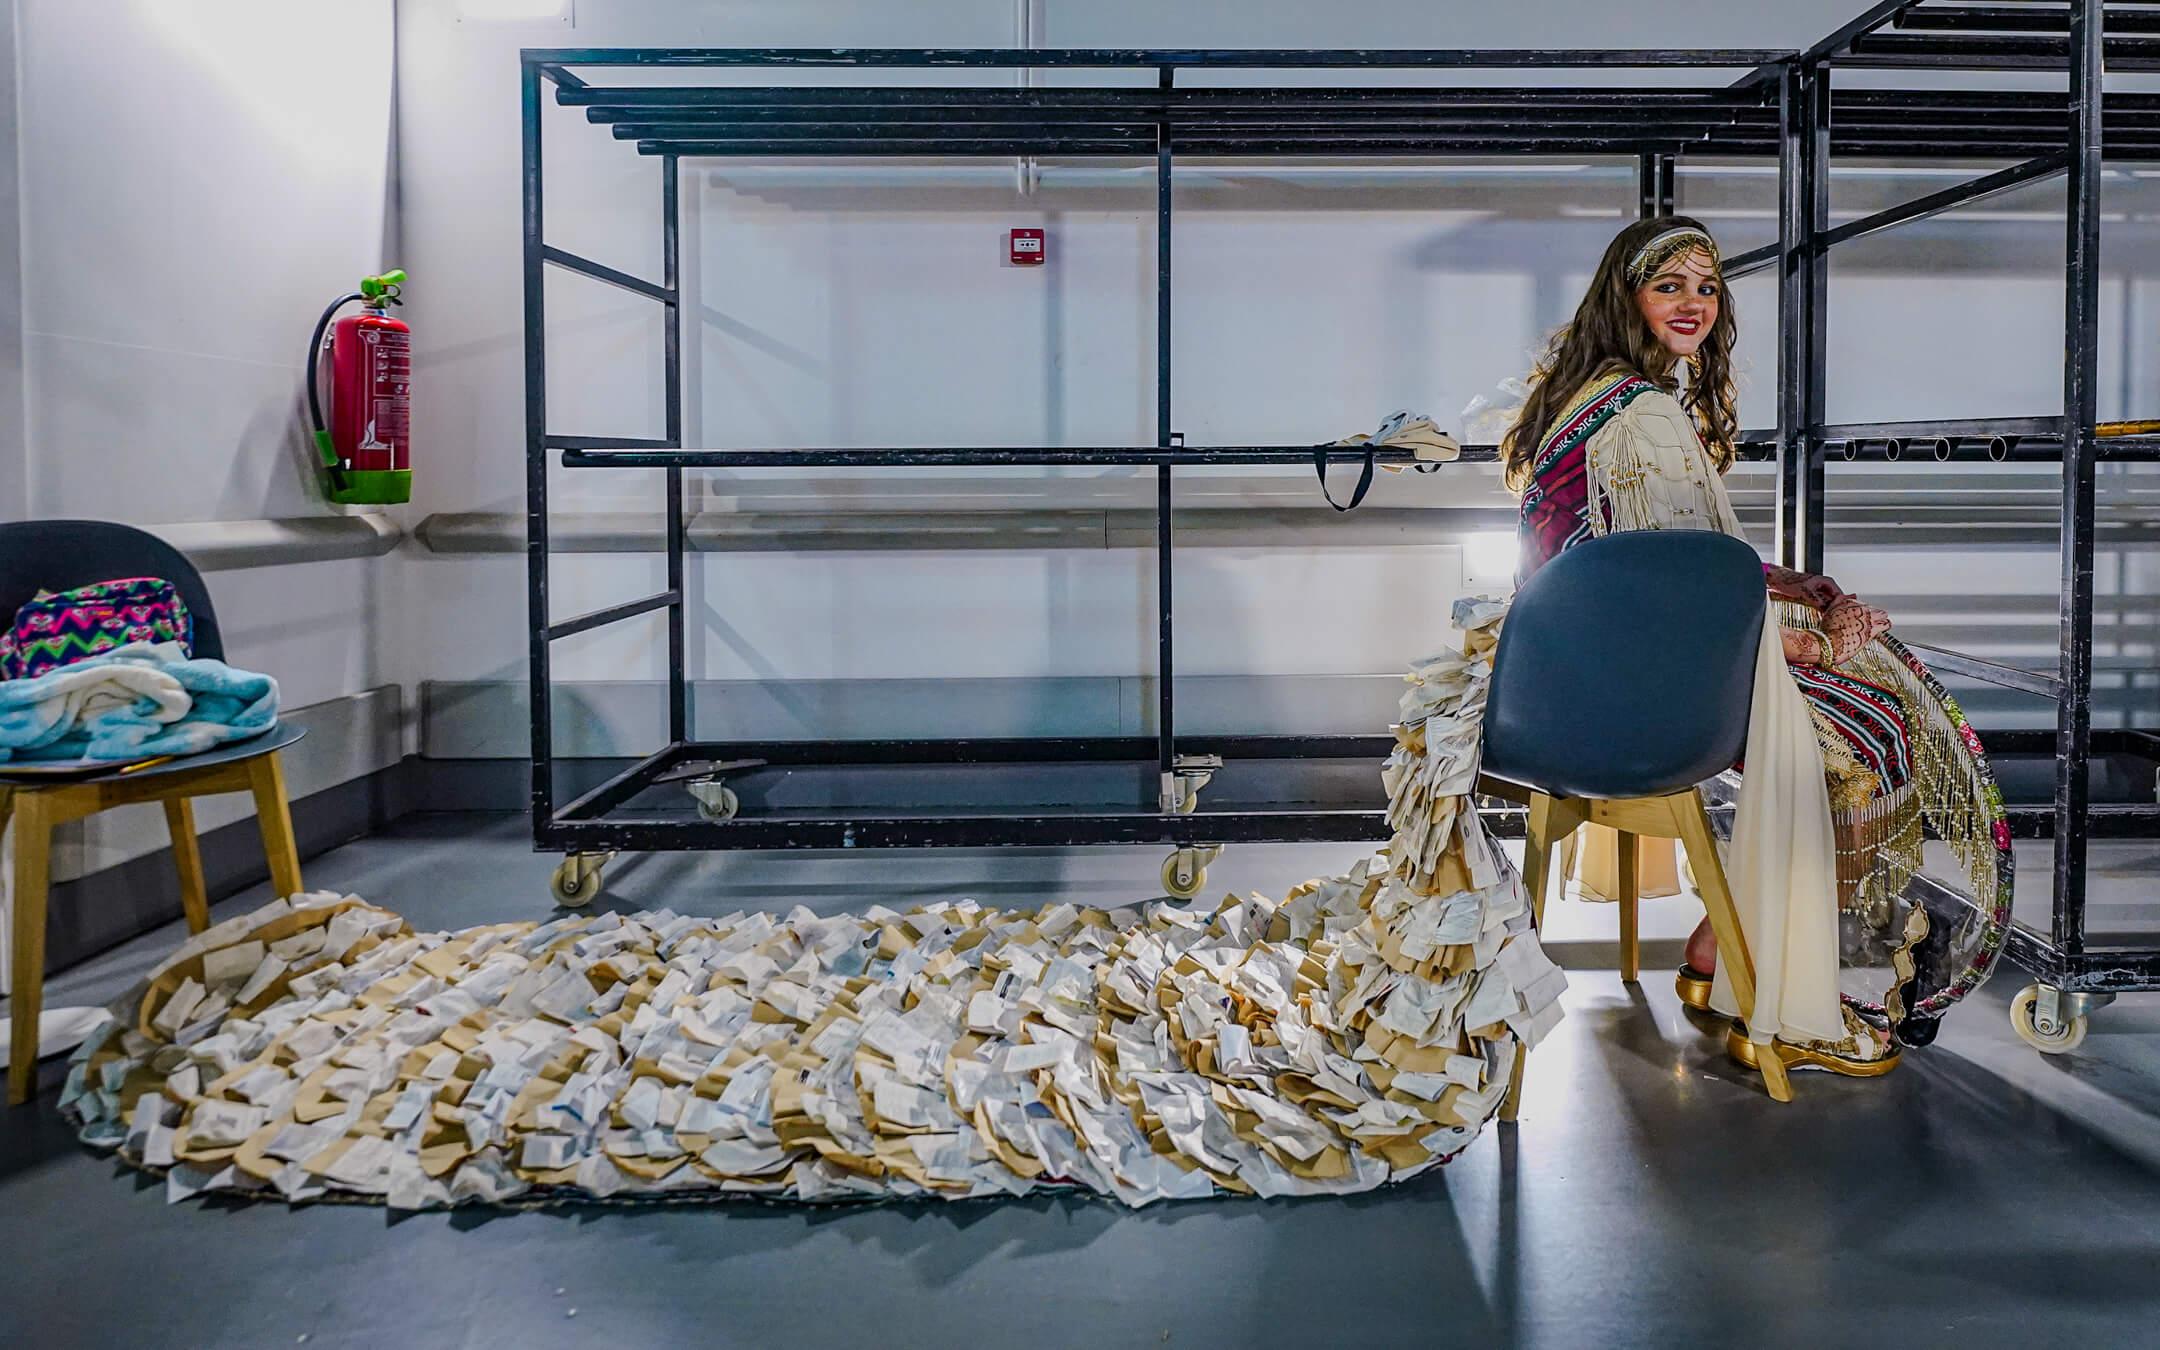 A behind-the-scenes shot of student competitors Iba Ali and Ayla Safar from the American School of Dubai and their incredible design.
Photographer: Stephane Danna